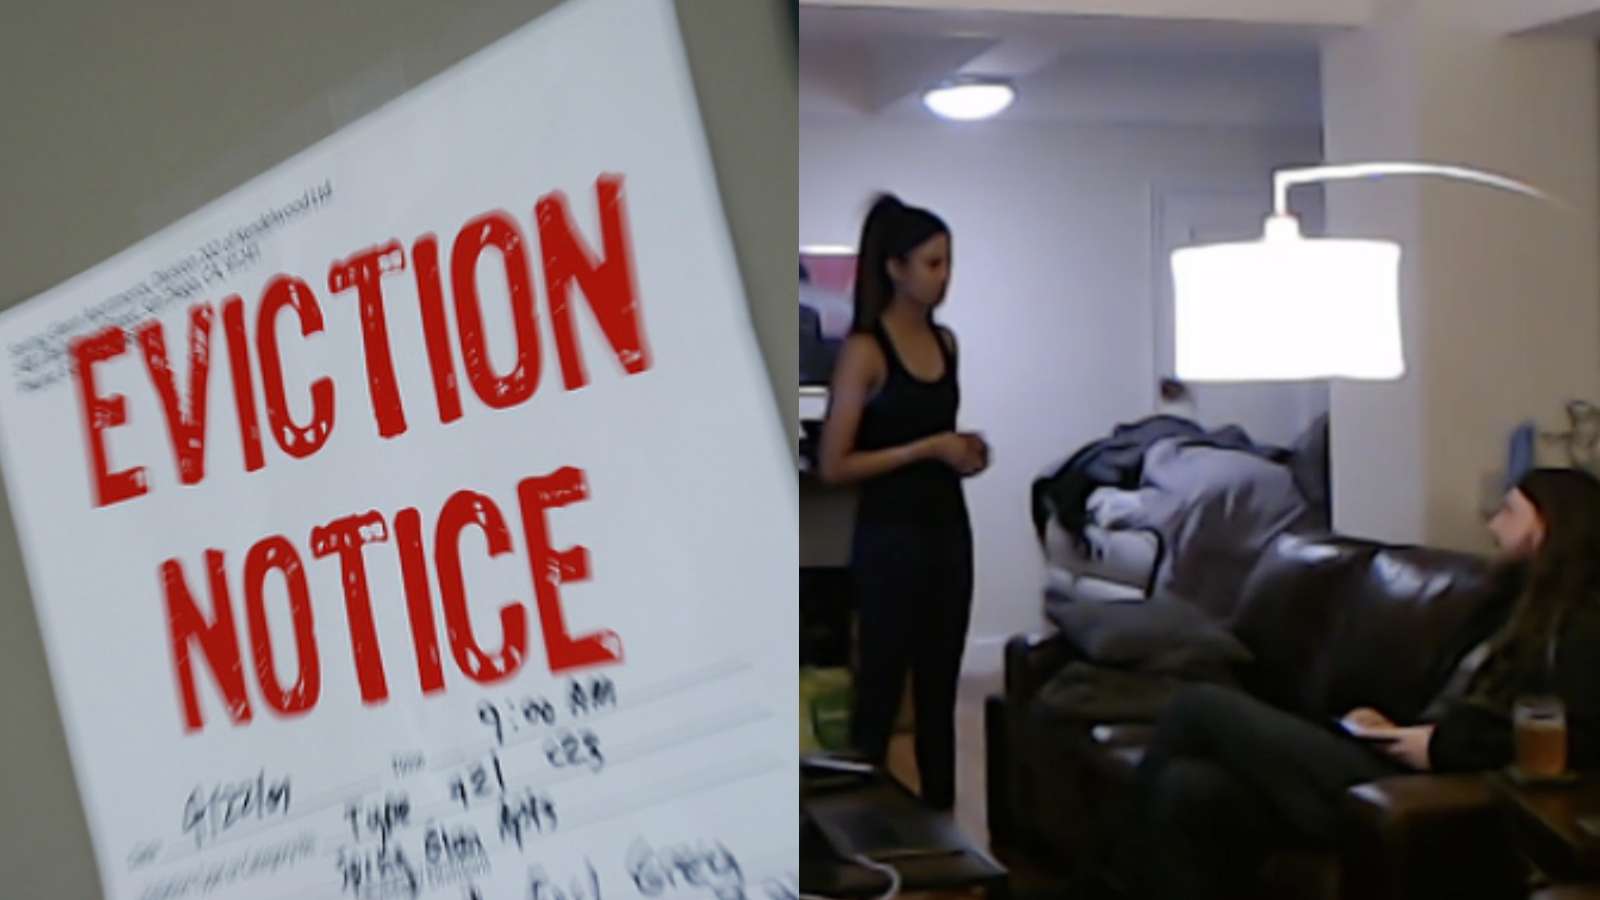 Streamer evicting roommate with an eviction sign